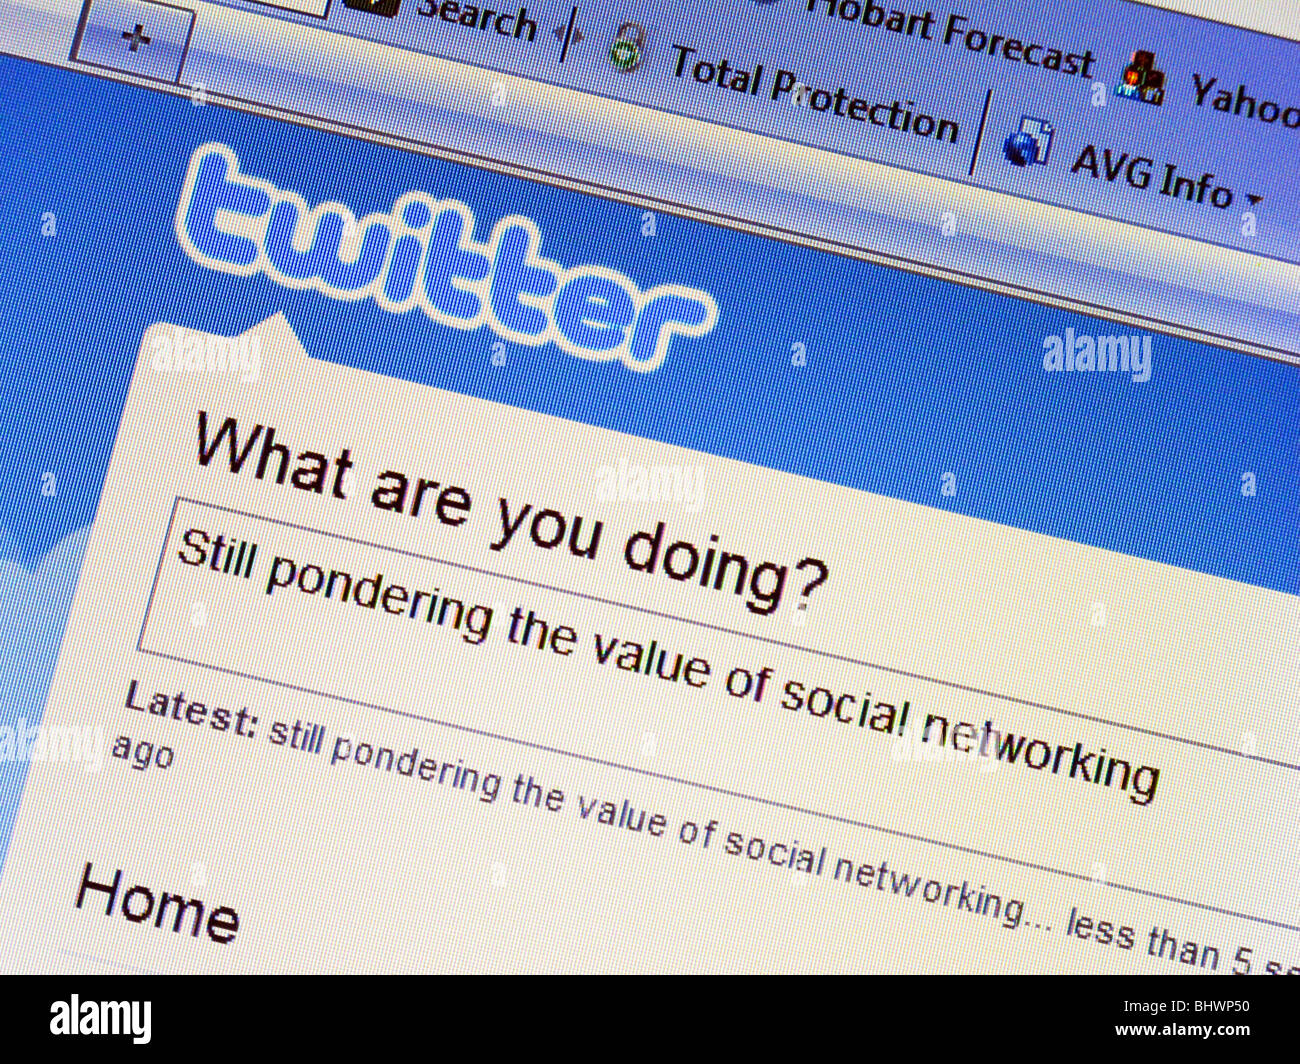 Old style Twitter screen in 2009,before it was taken over by Elon Musk and became X, with the message 'Still pondering the value of social networking' Stock Photo